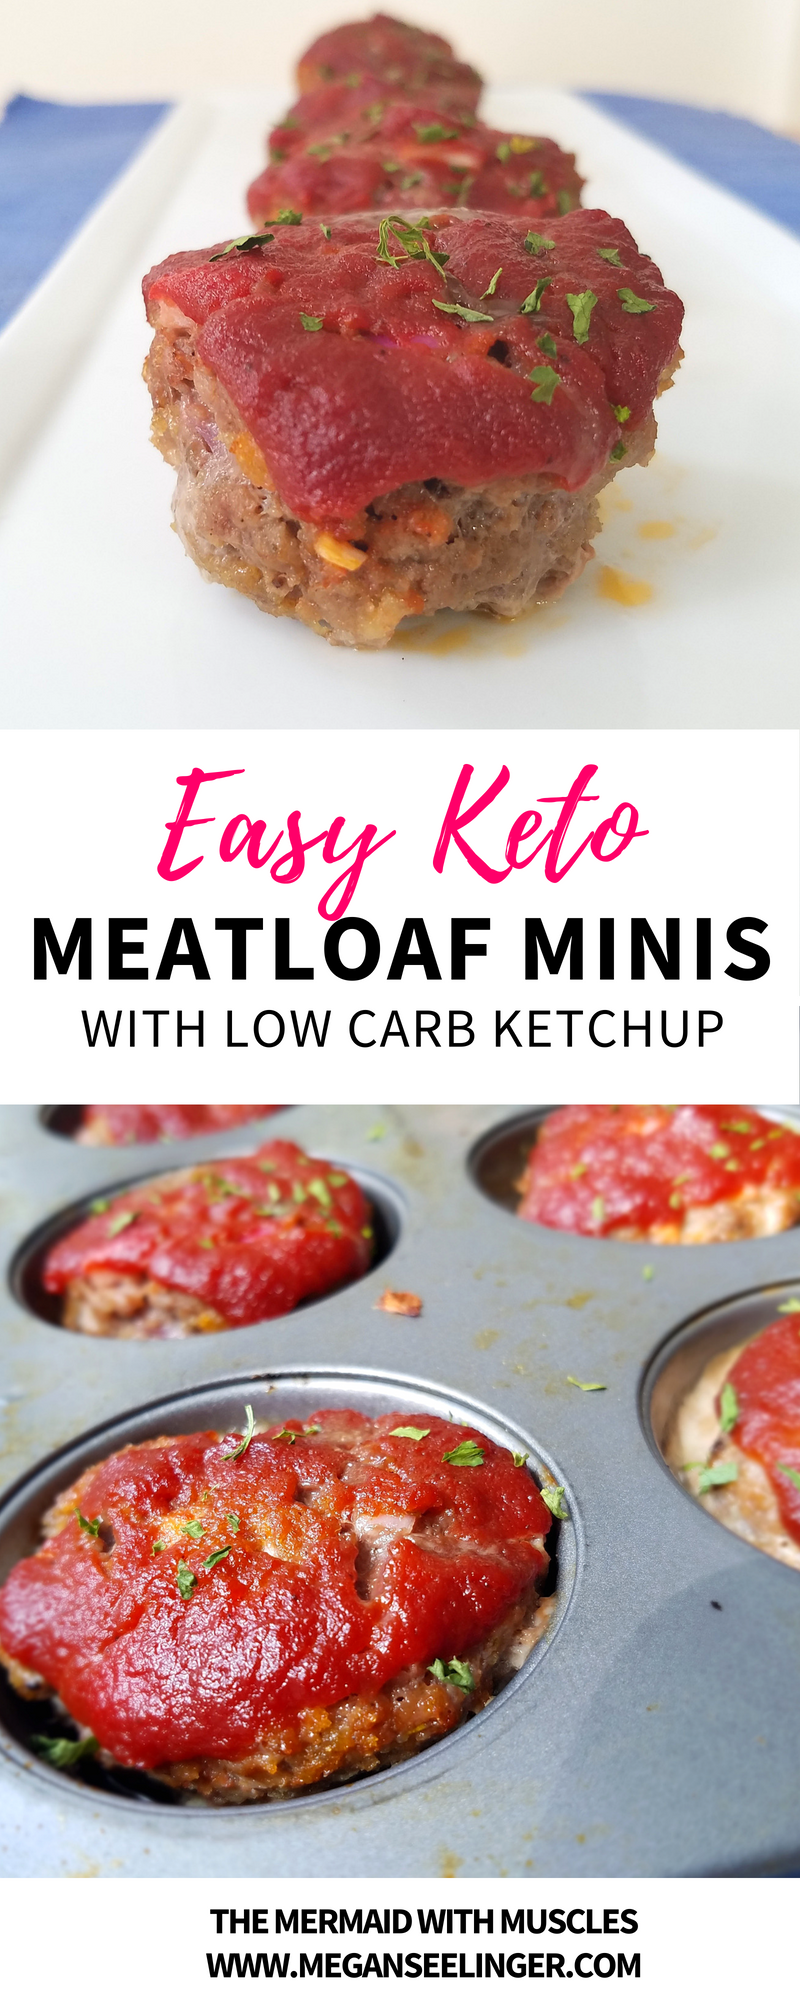 The Best Keto Meatloaf Minis with Low Carb Ketchup -   24 diet meals dinner
 ideas